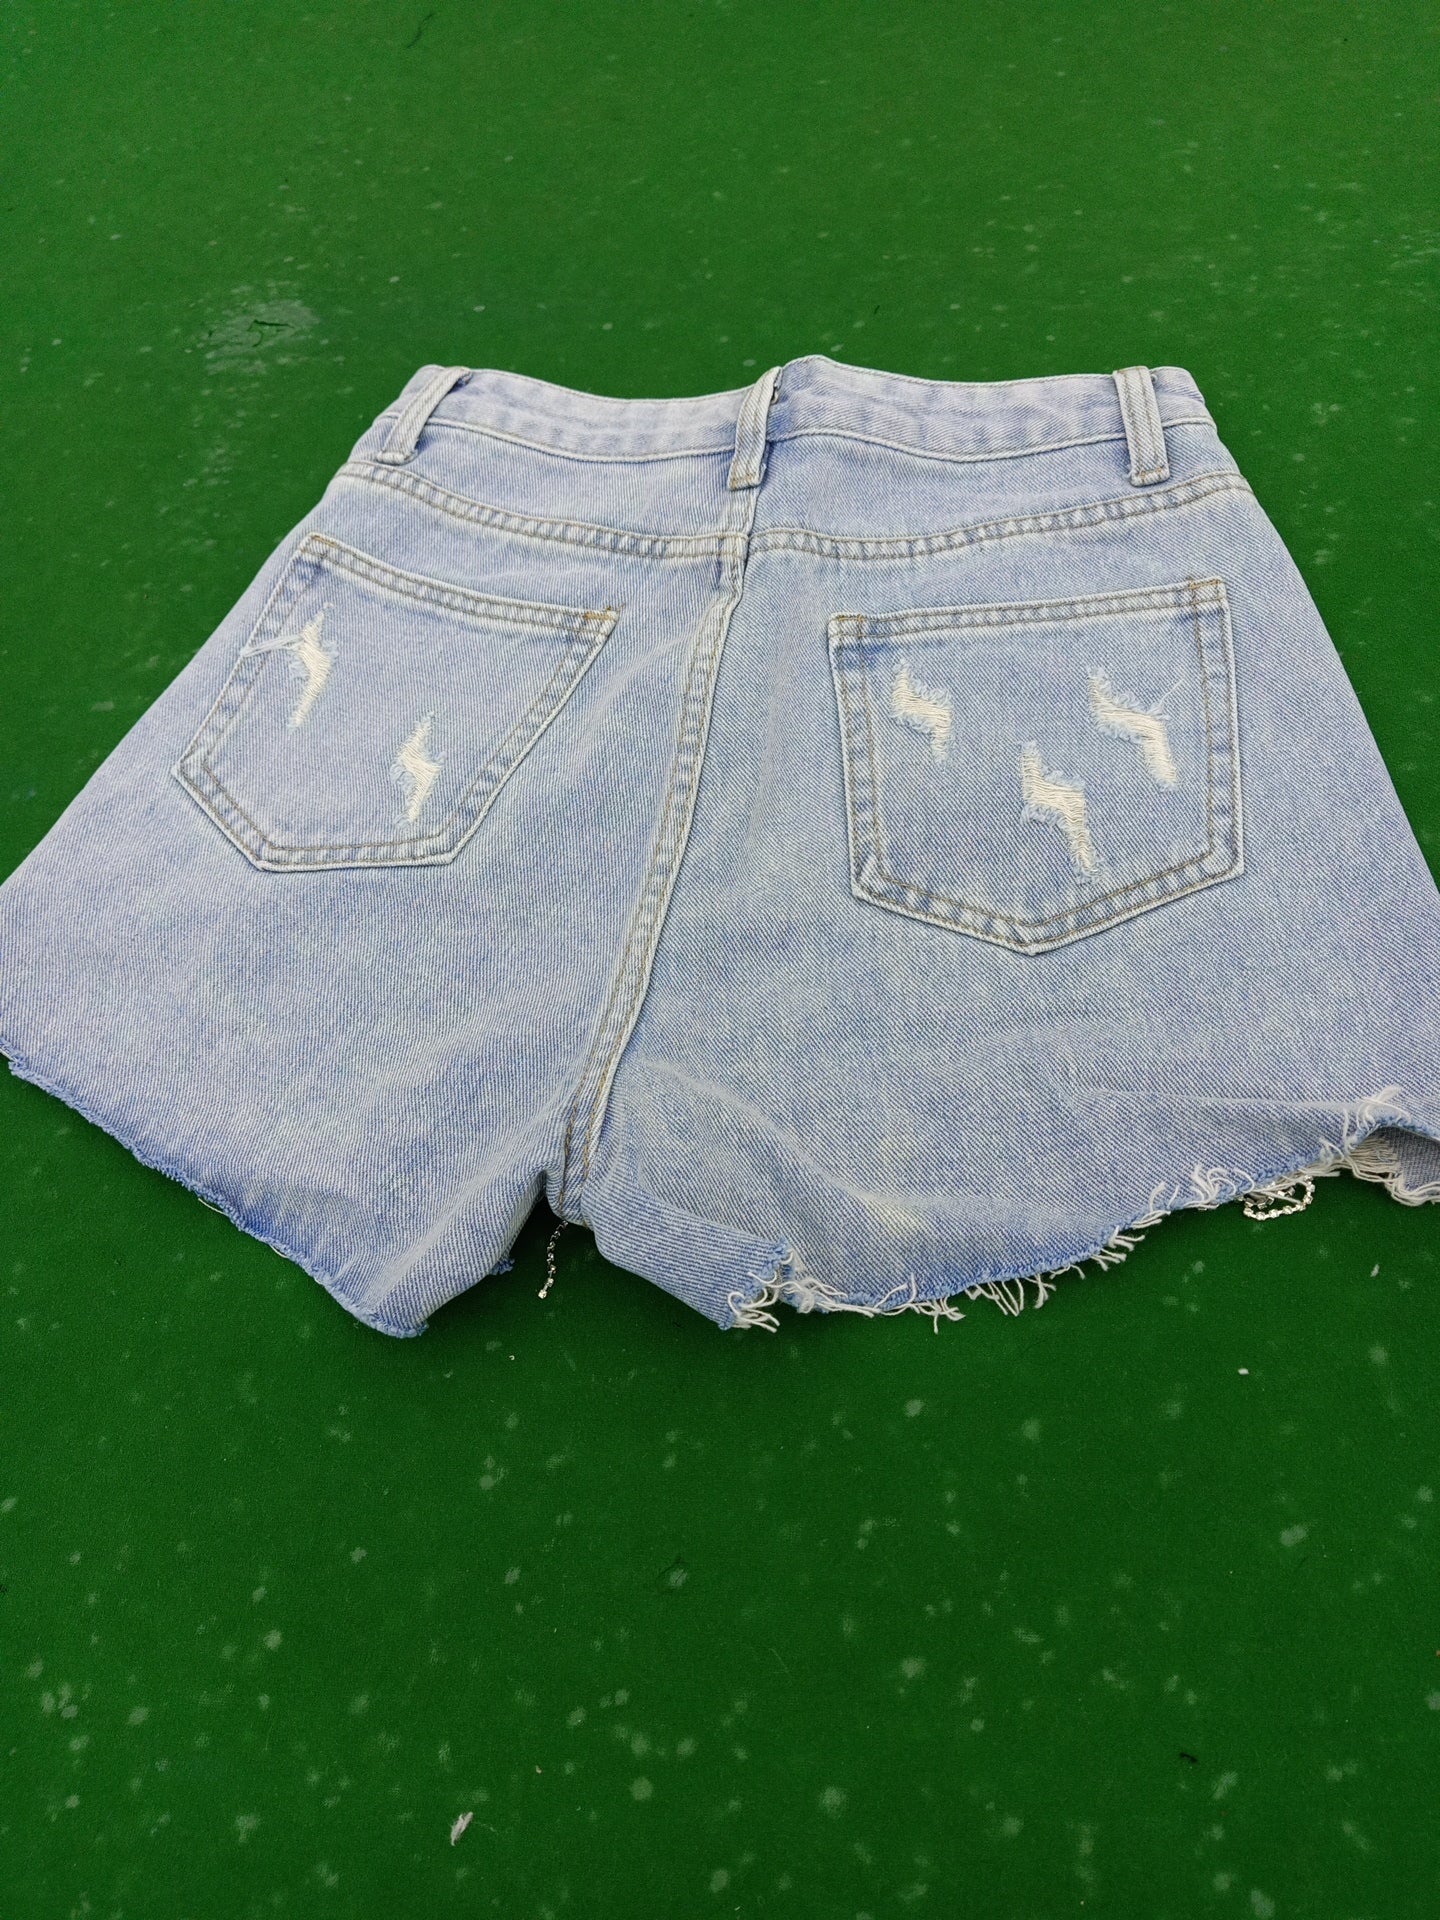 New Arrival Women Denim Sexy Rhinestone  Beading Shorts Jeans for Woman